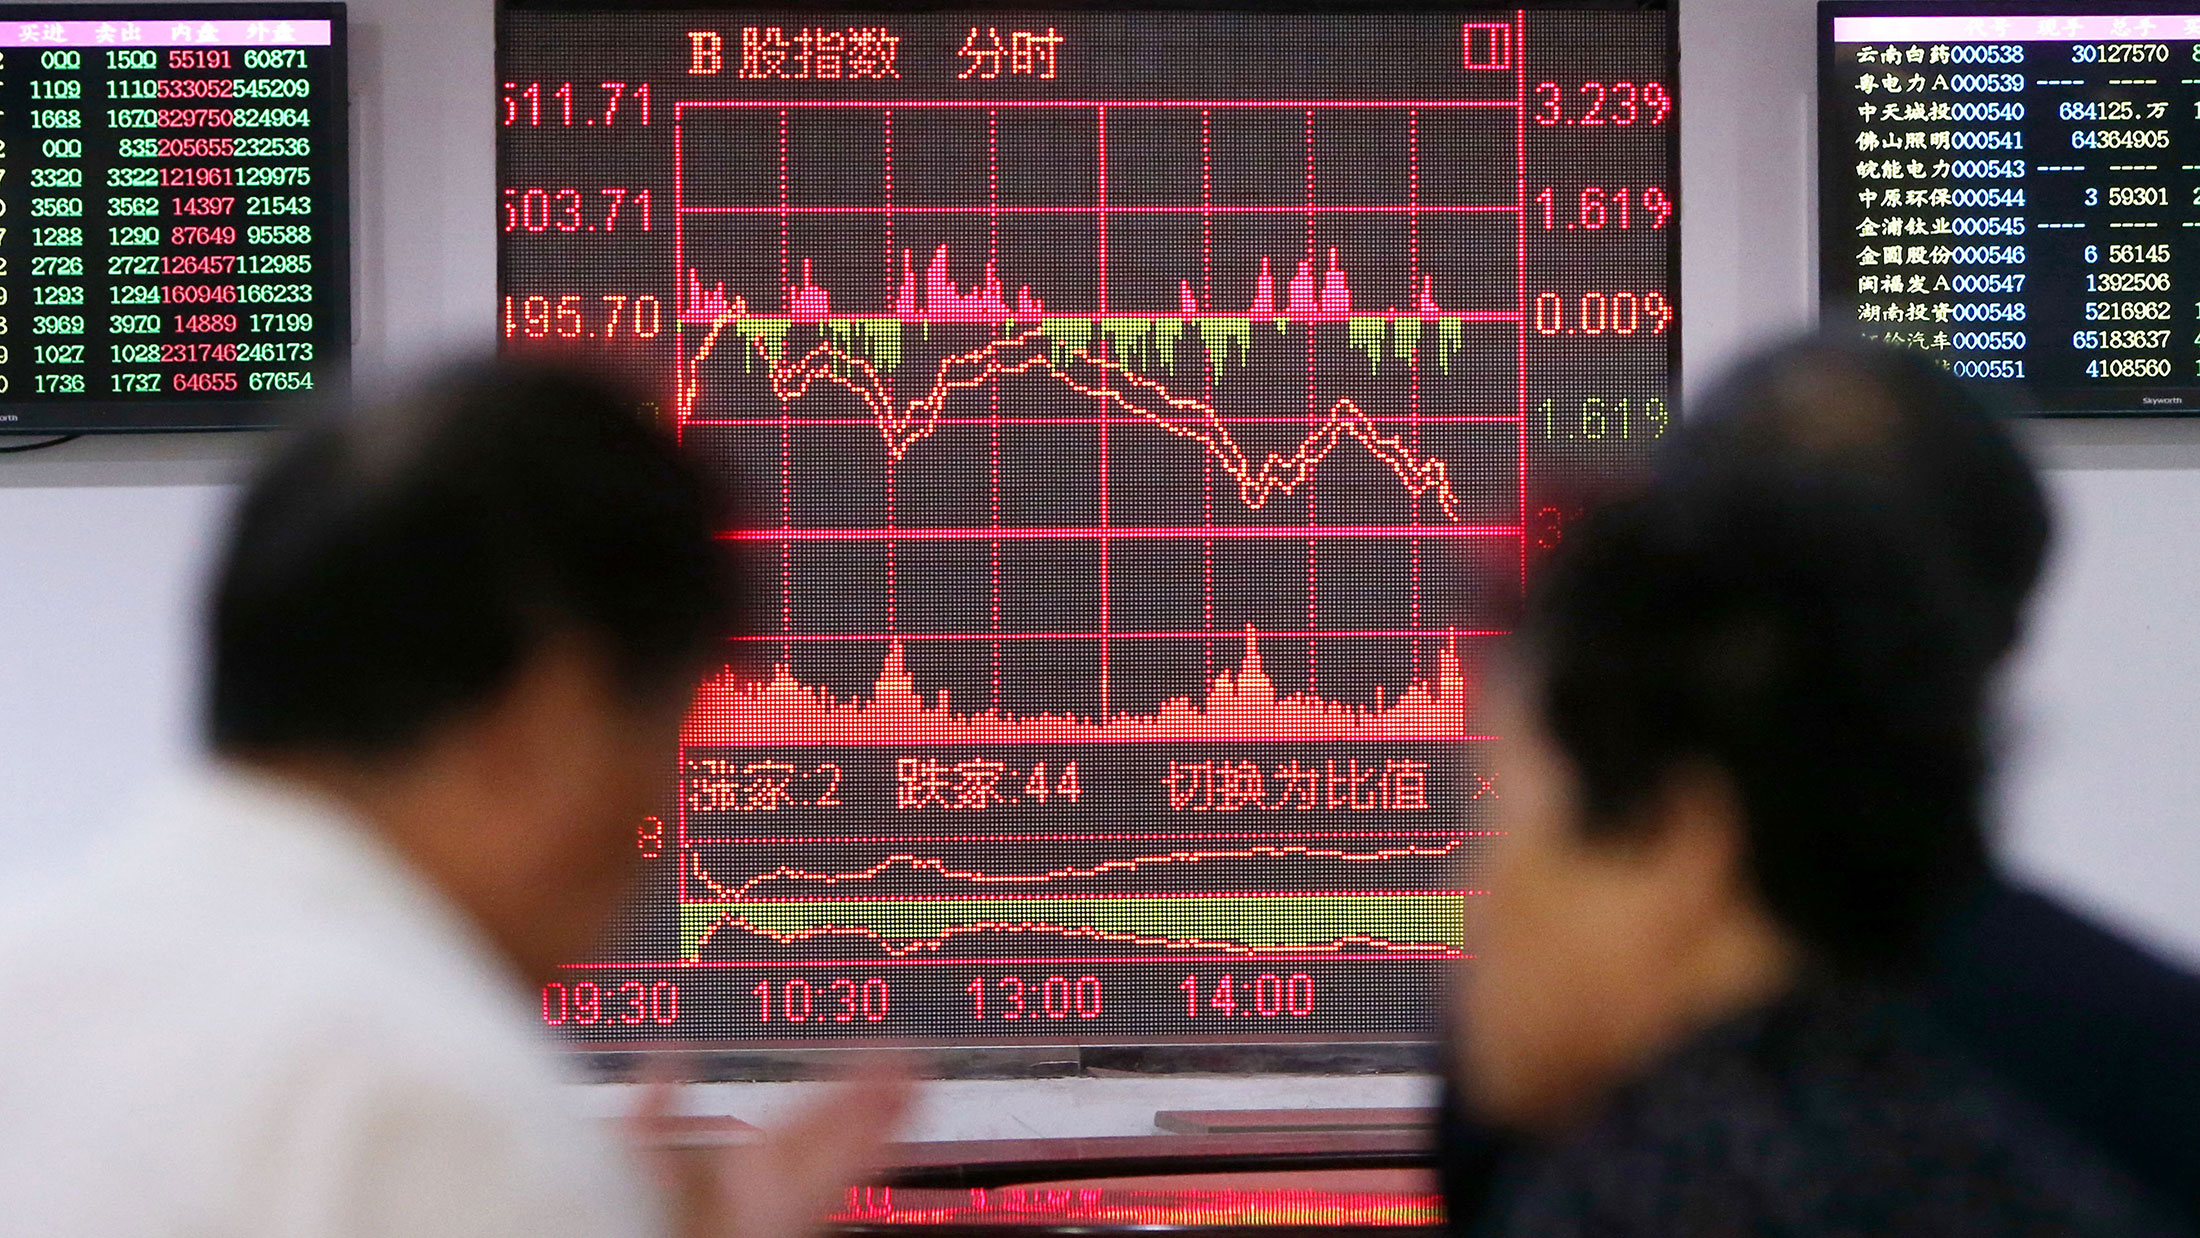 Investors look through stock information at a trading hall in a securities firm in Shanghai on June 19, 2015.
